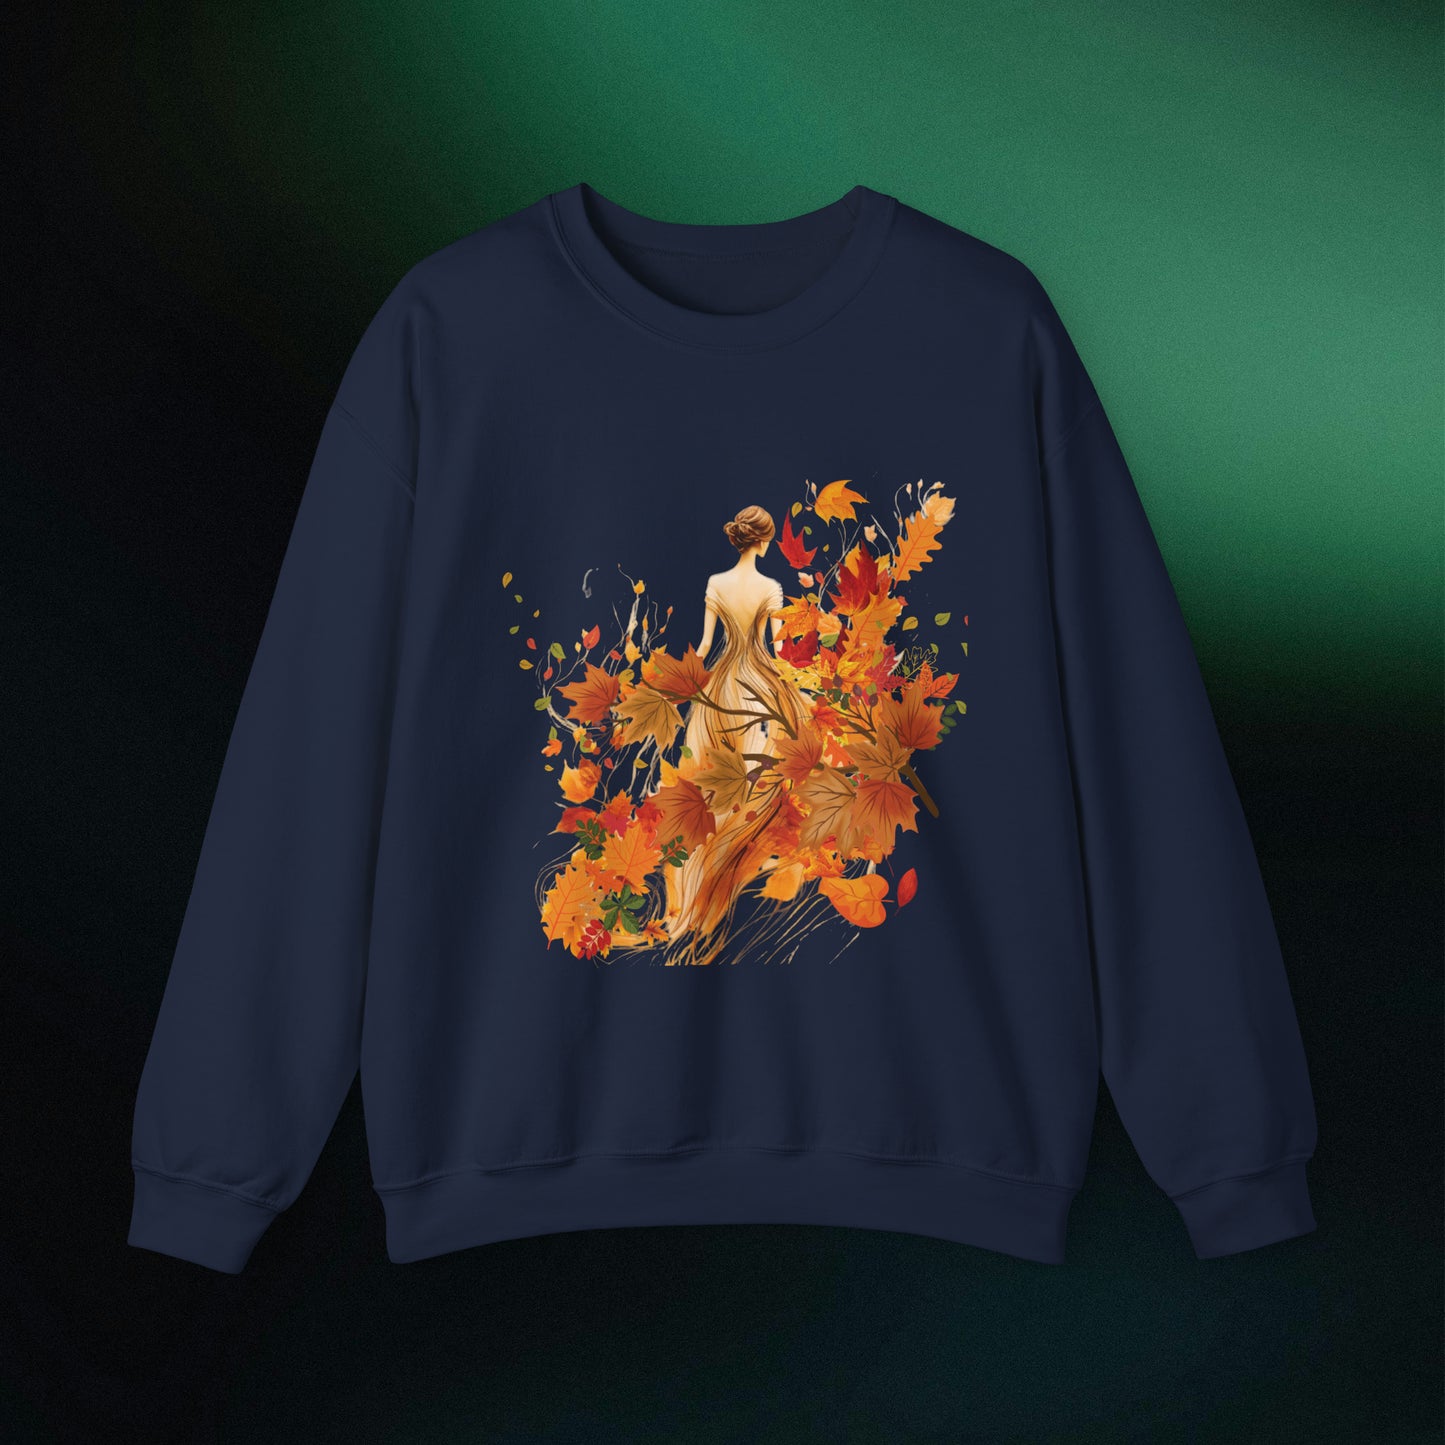 Whimsical Dreams in Autumn Hues: Romantic Dreamy Female Surrounded by Autumn Leaves Sweatshirt Sweatshirt S Navy 